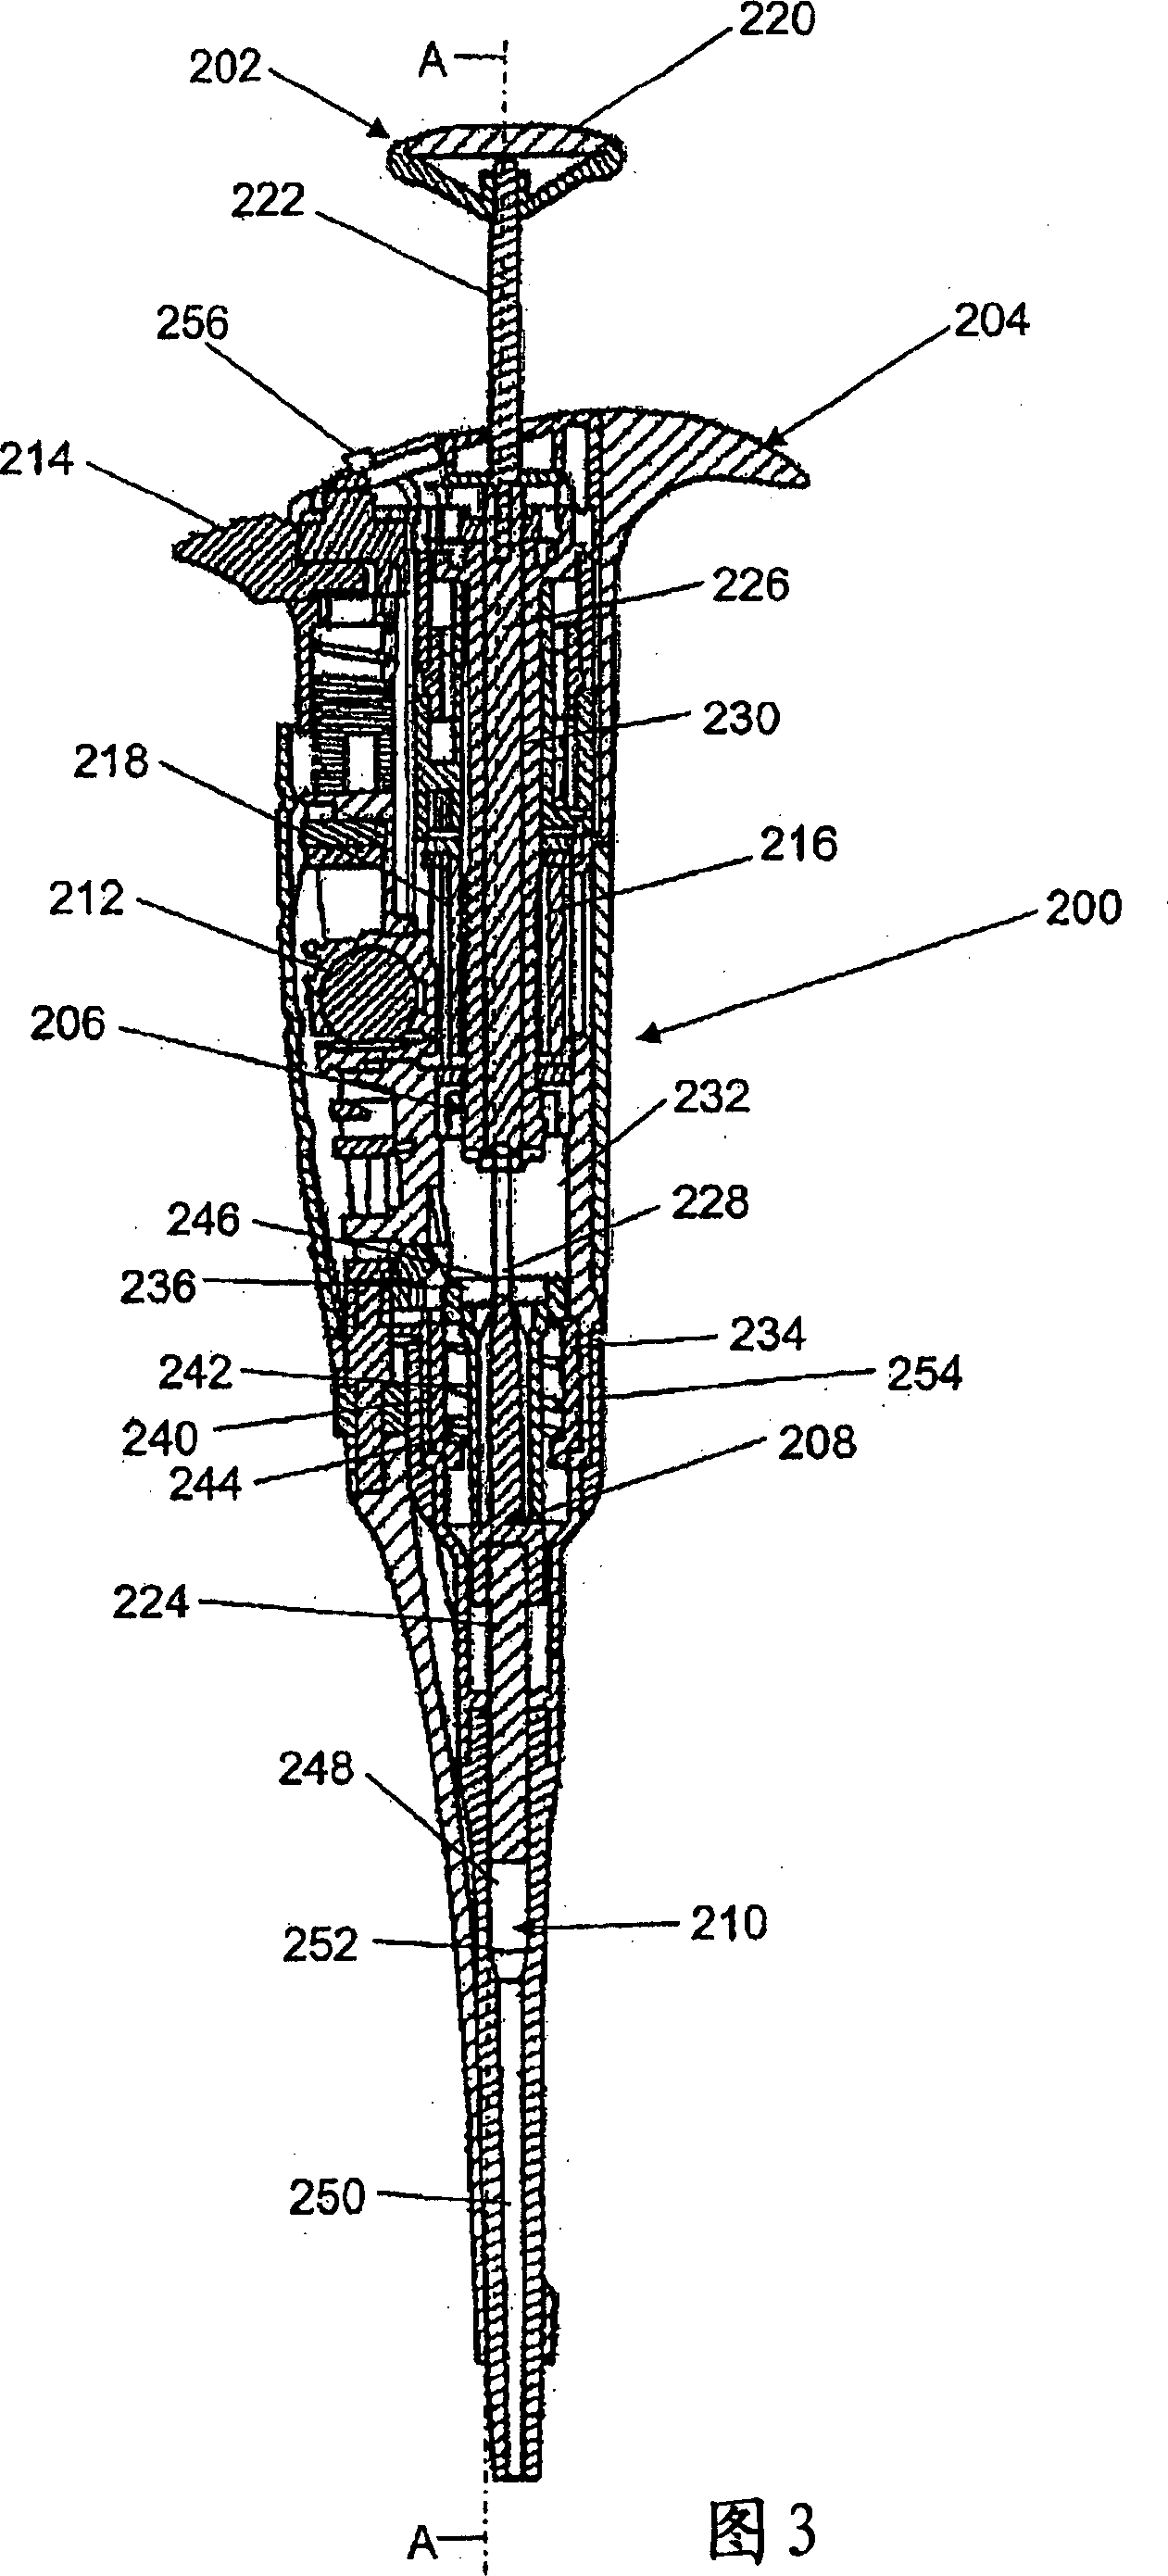 System and method for accurate measuring volume of liquid in a pipette